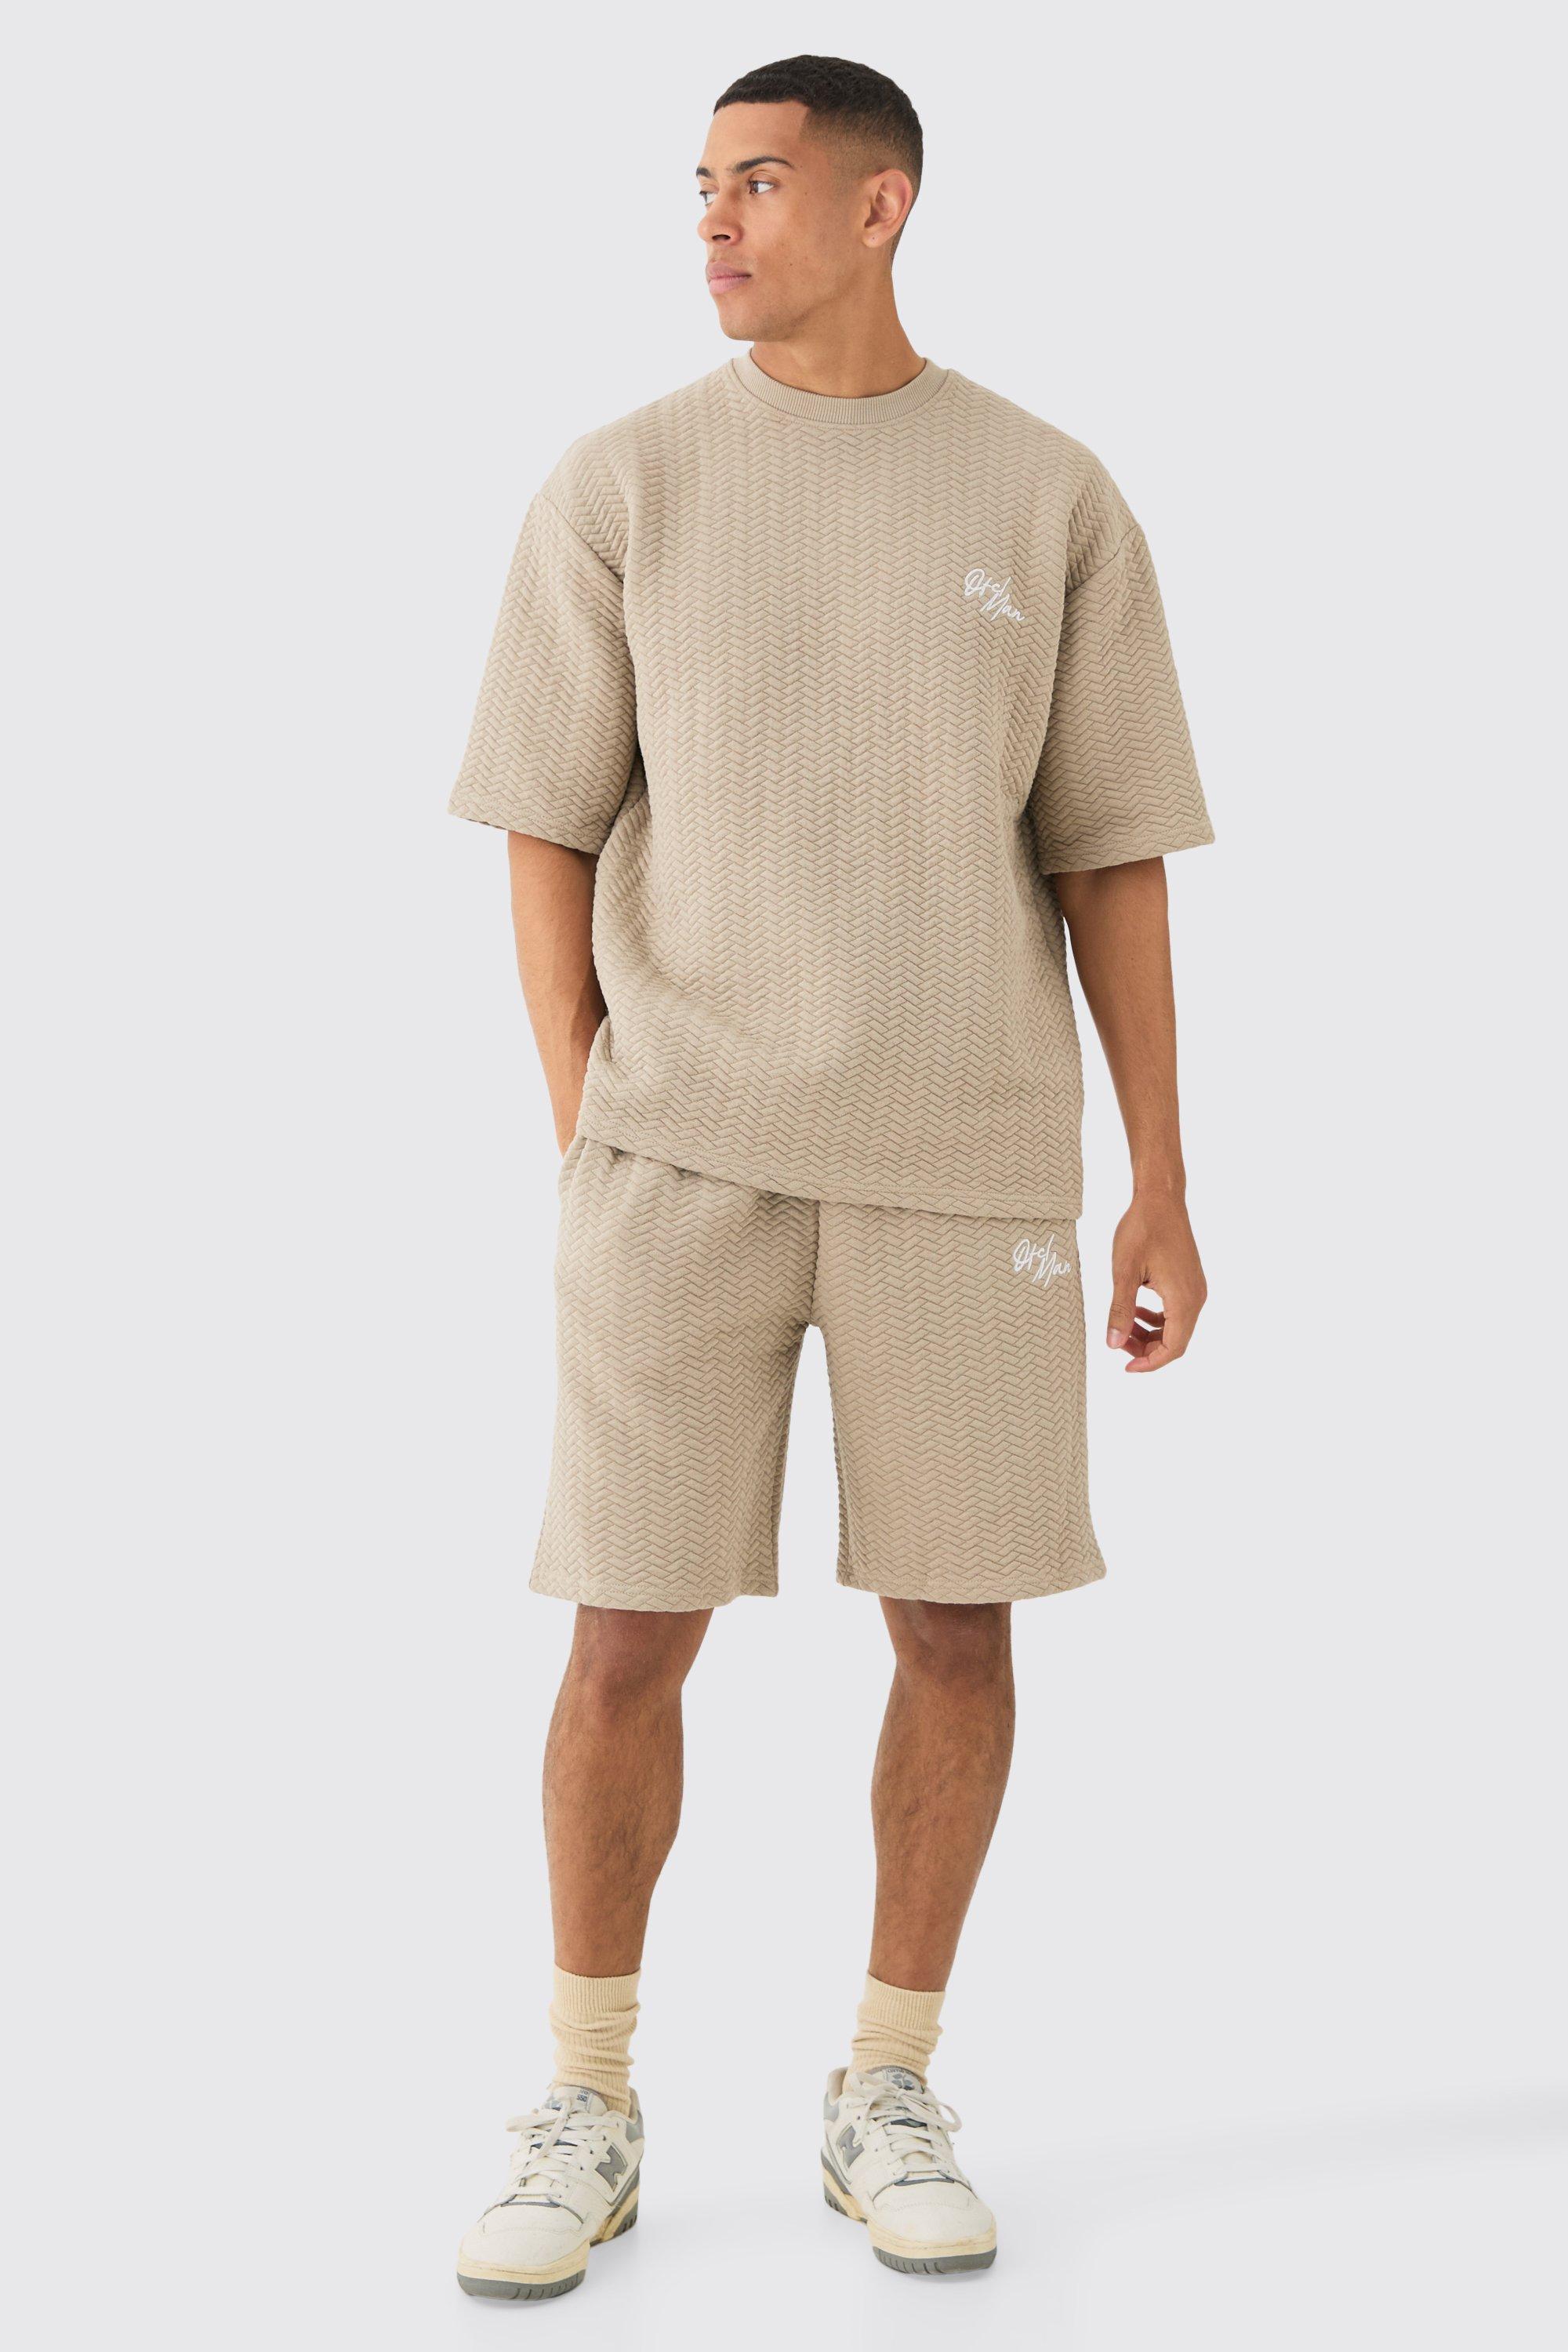 Image of Oversized Quilted Herringbone T-shirt And Short Set, Beige